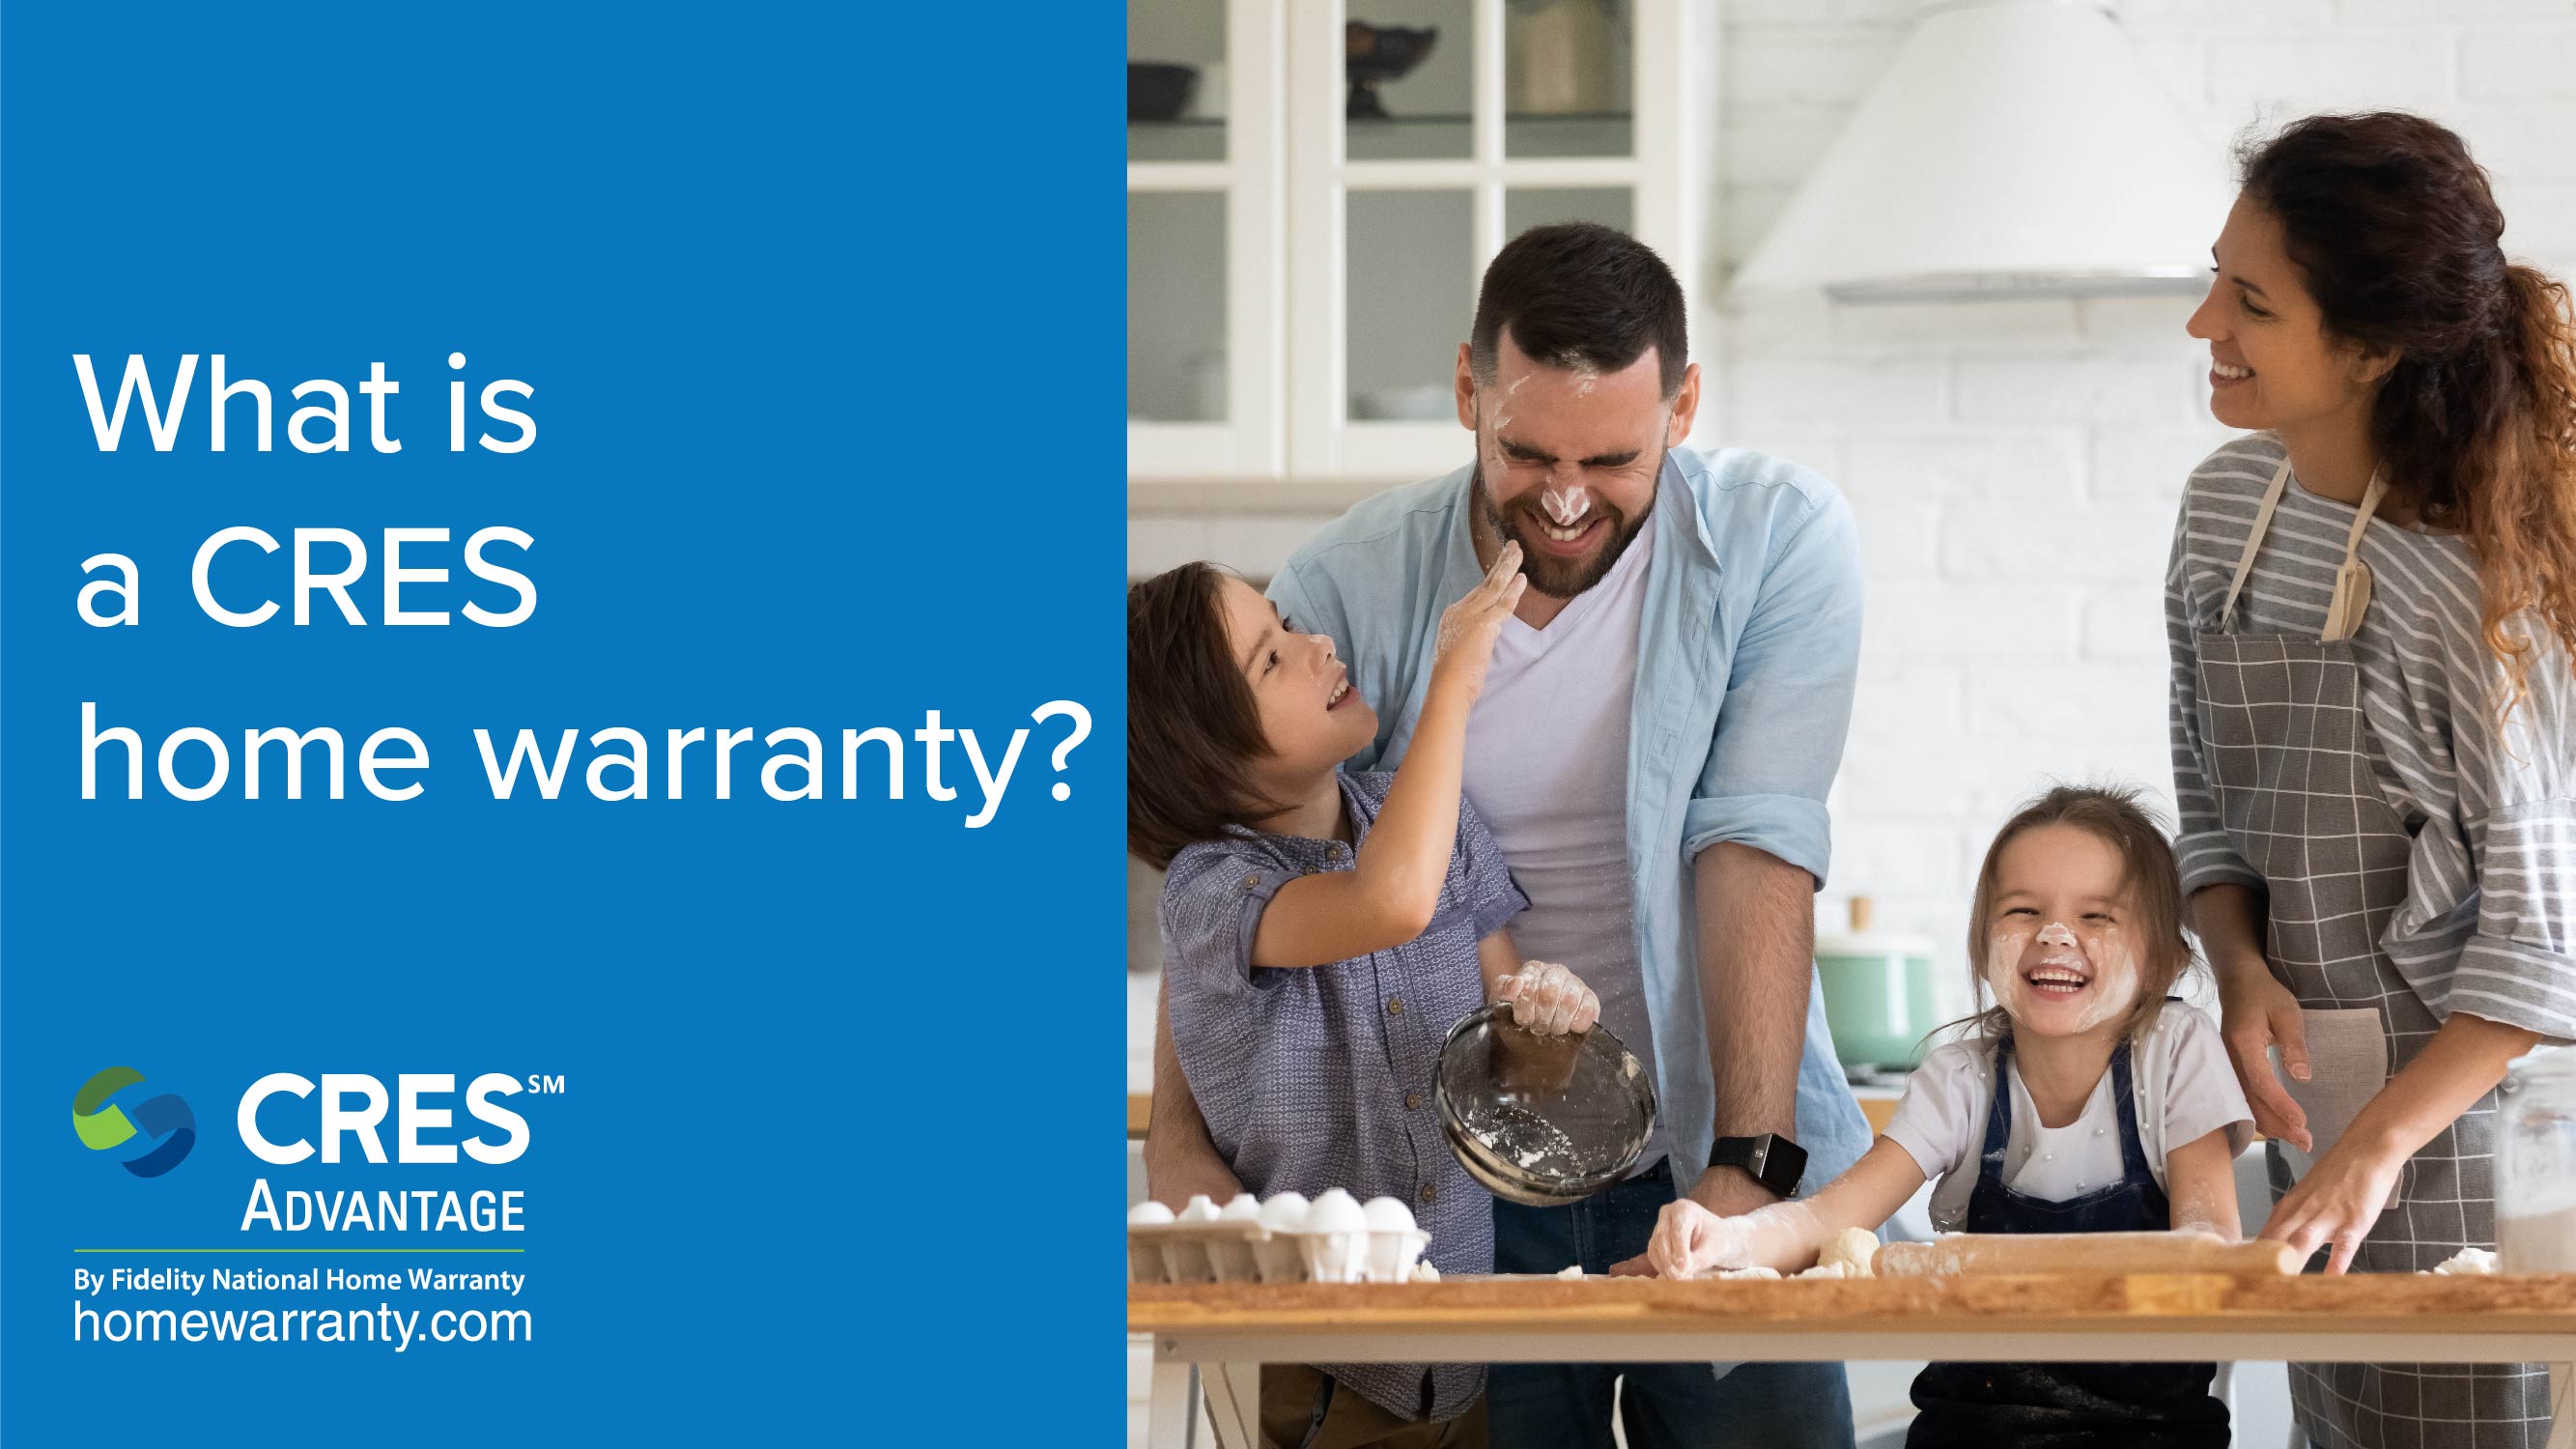 What is a Home Warranty - Image of parents and 2 kids laughing with a mess in the kitchen